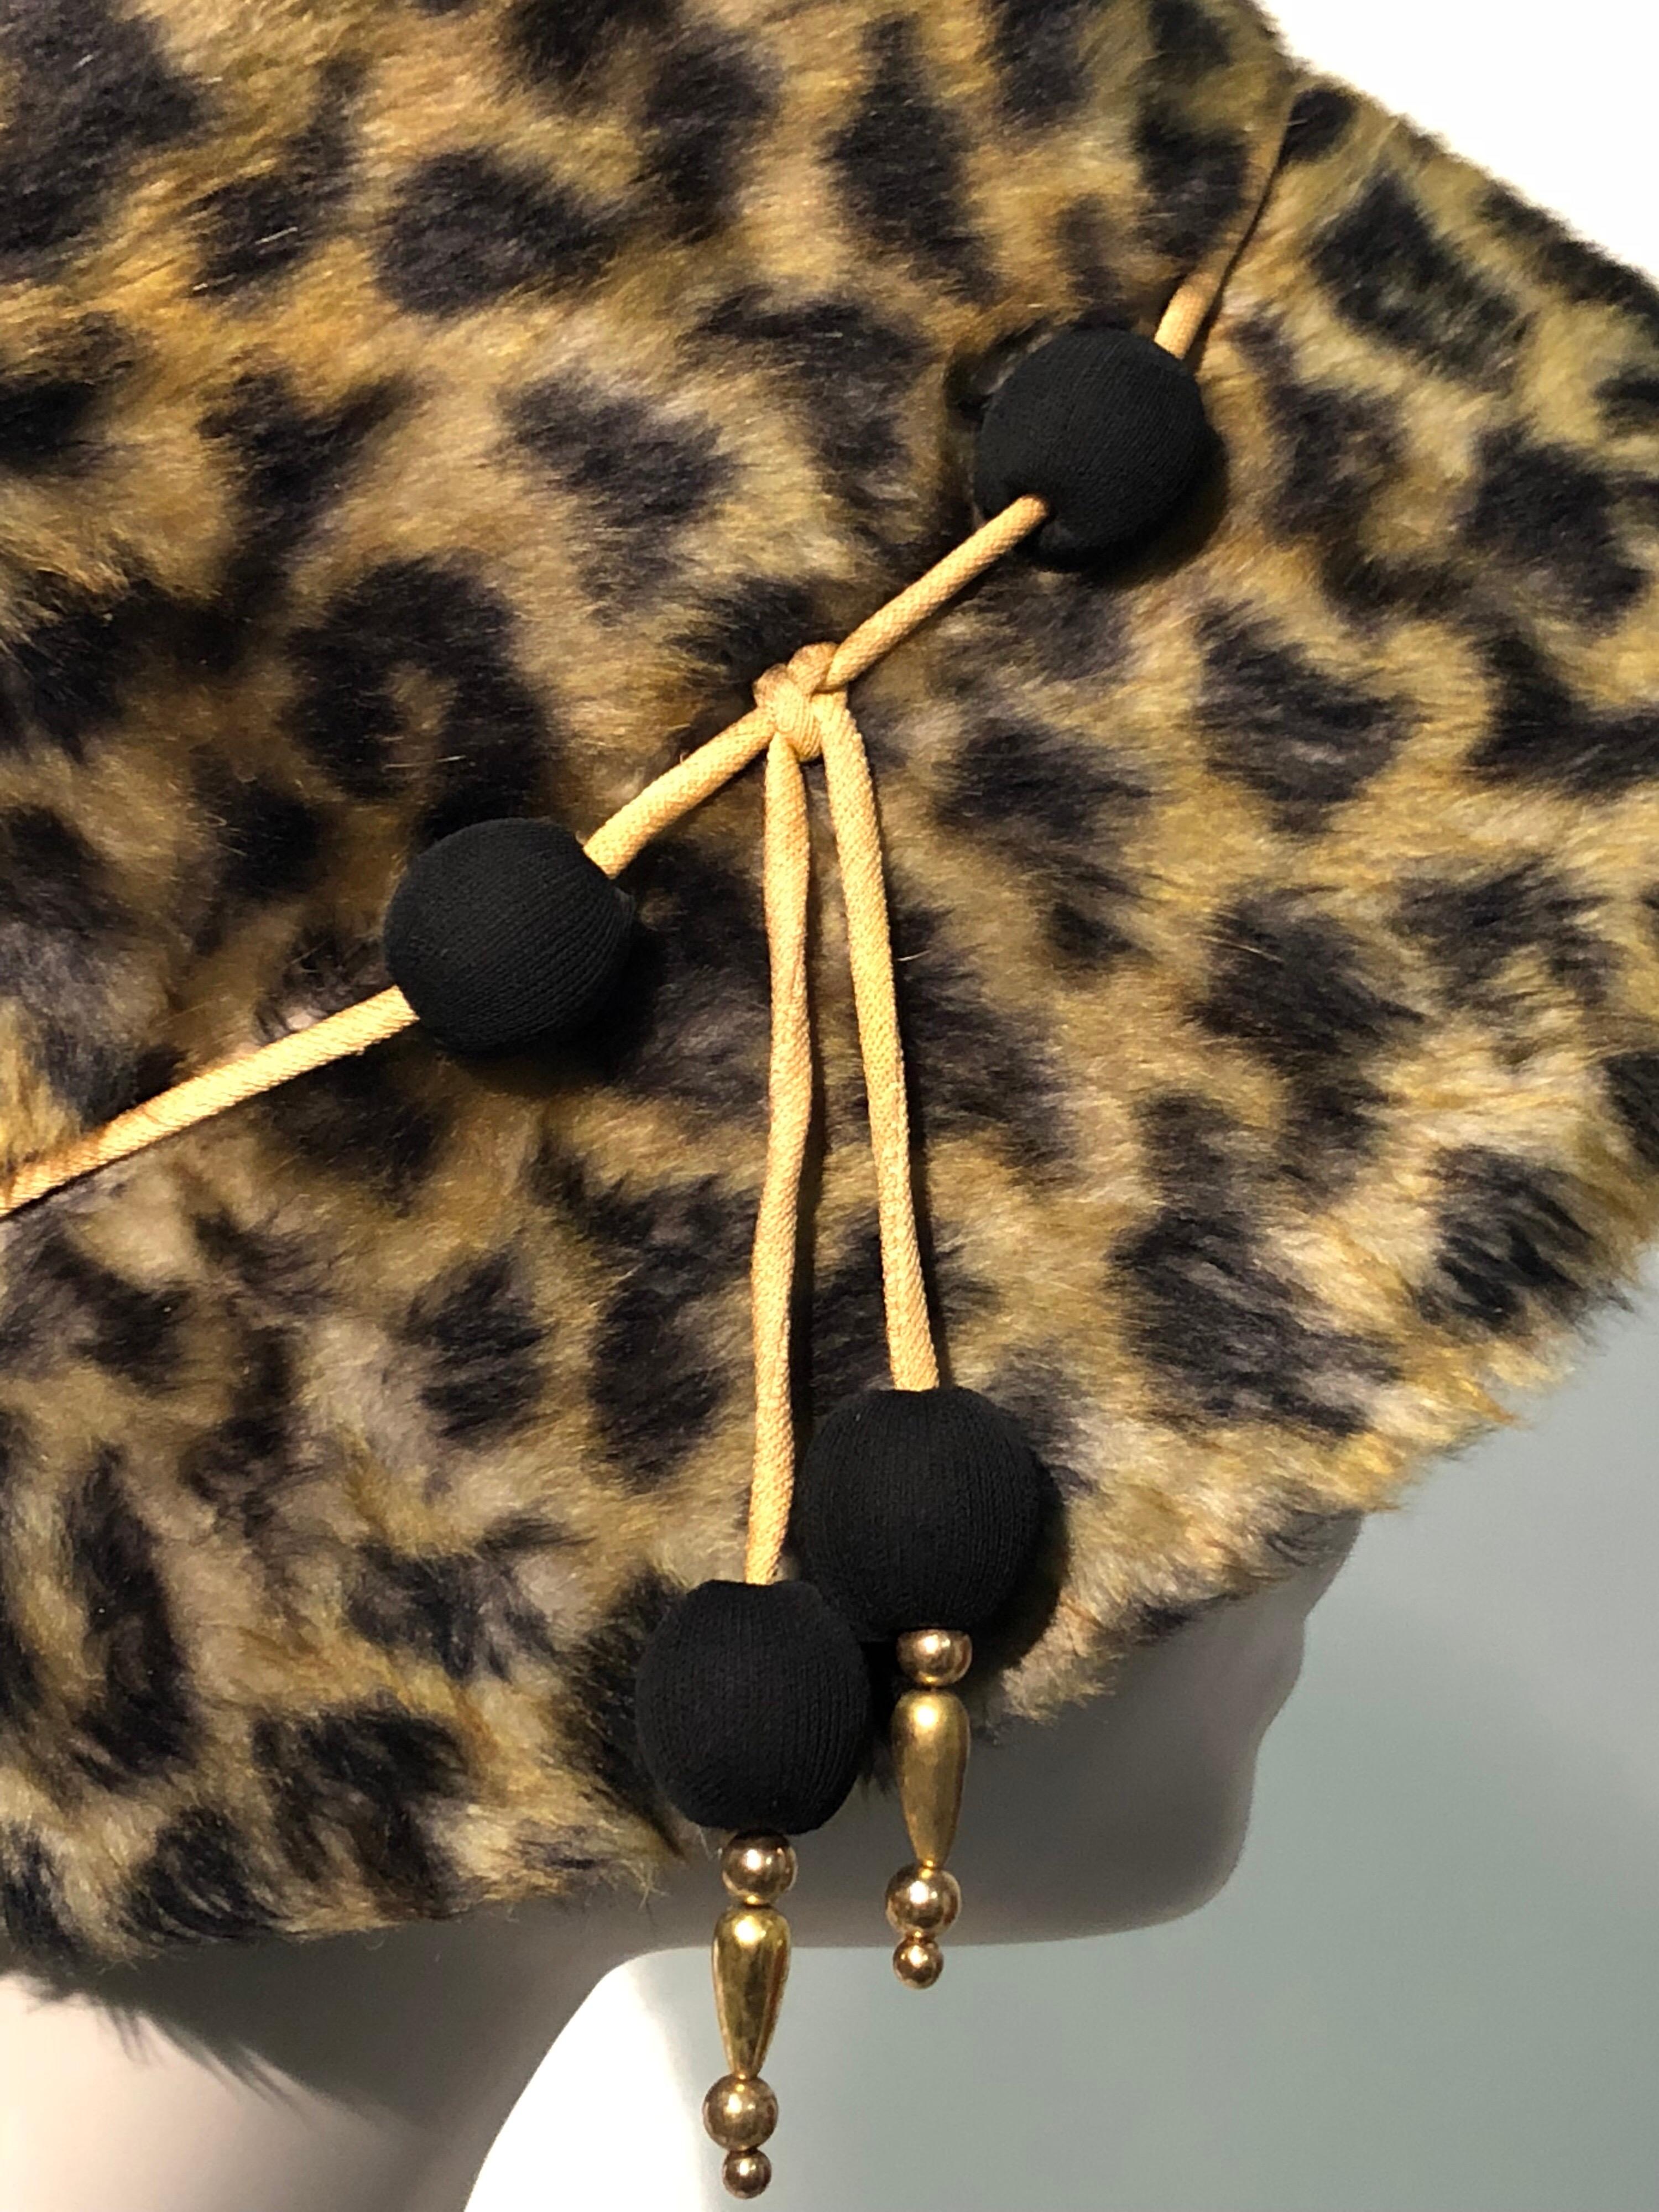 1960s Leslie James Leopard Print Faux Fur Bucket Style Hat W/ Unique Beaded Band In Excellent Condition For Sale In Gresham, OR